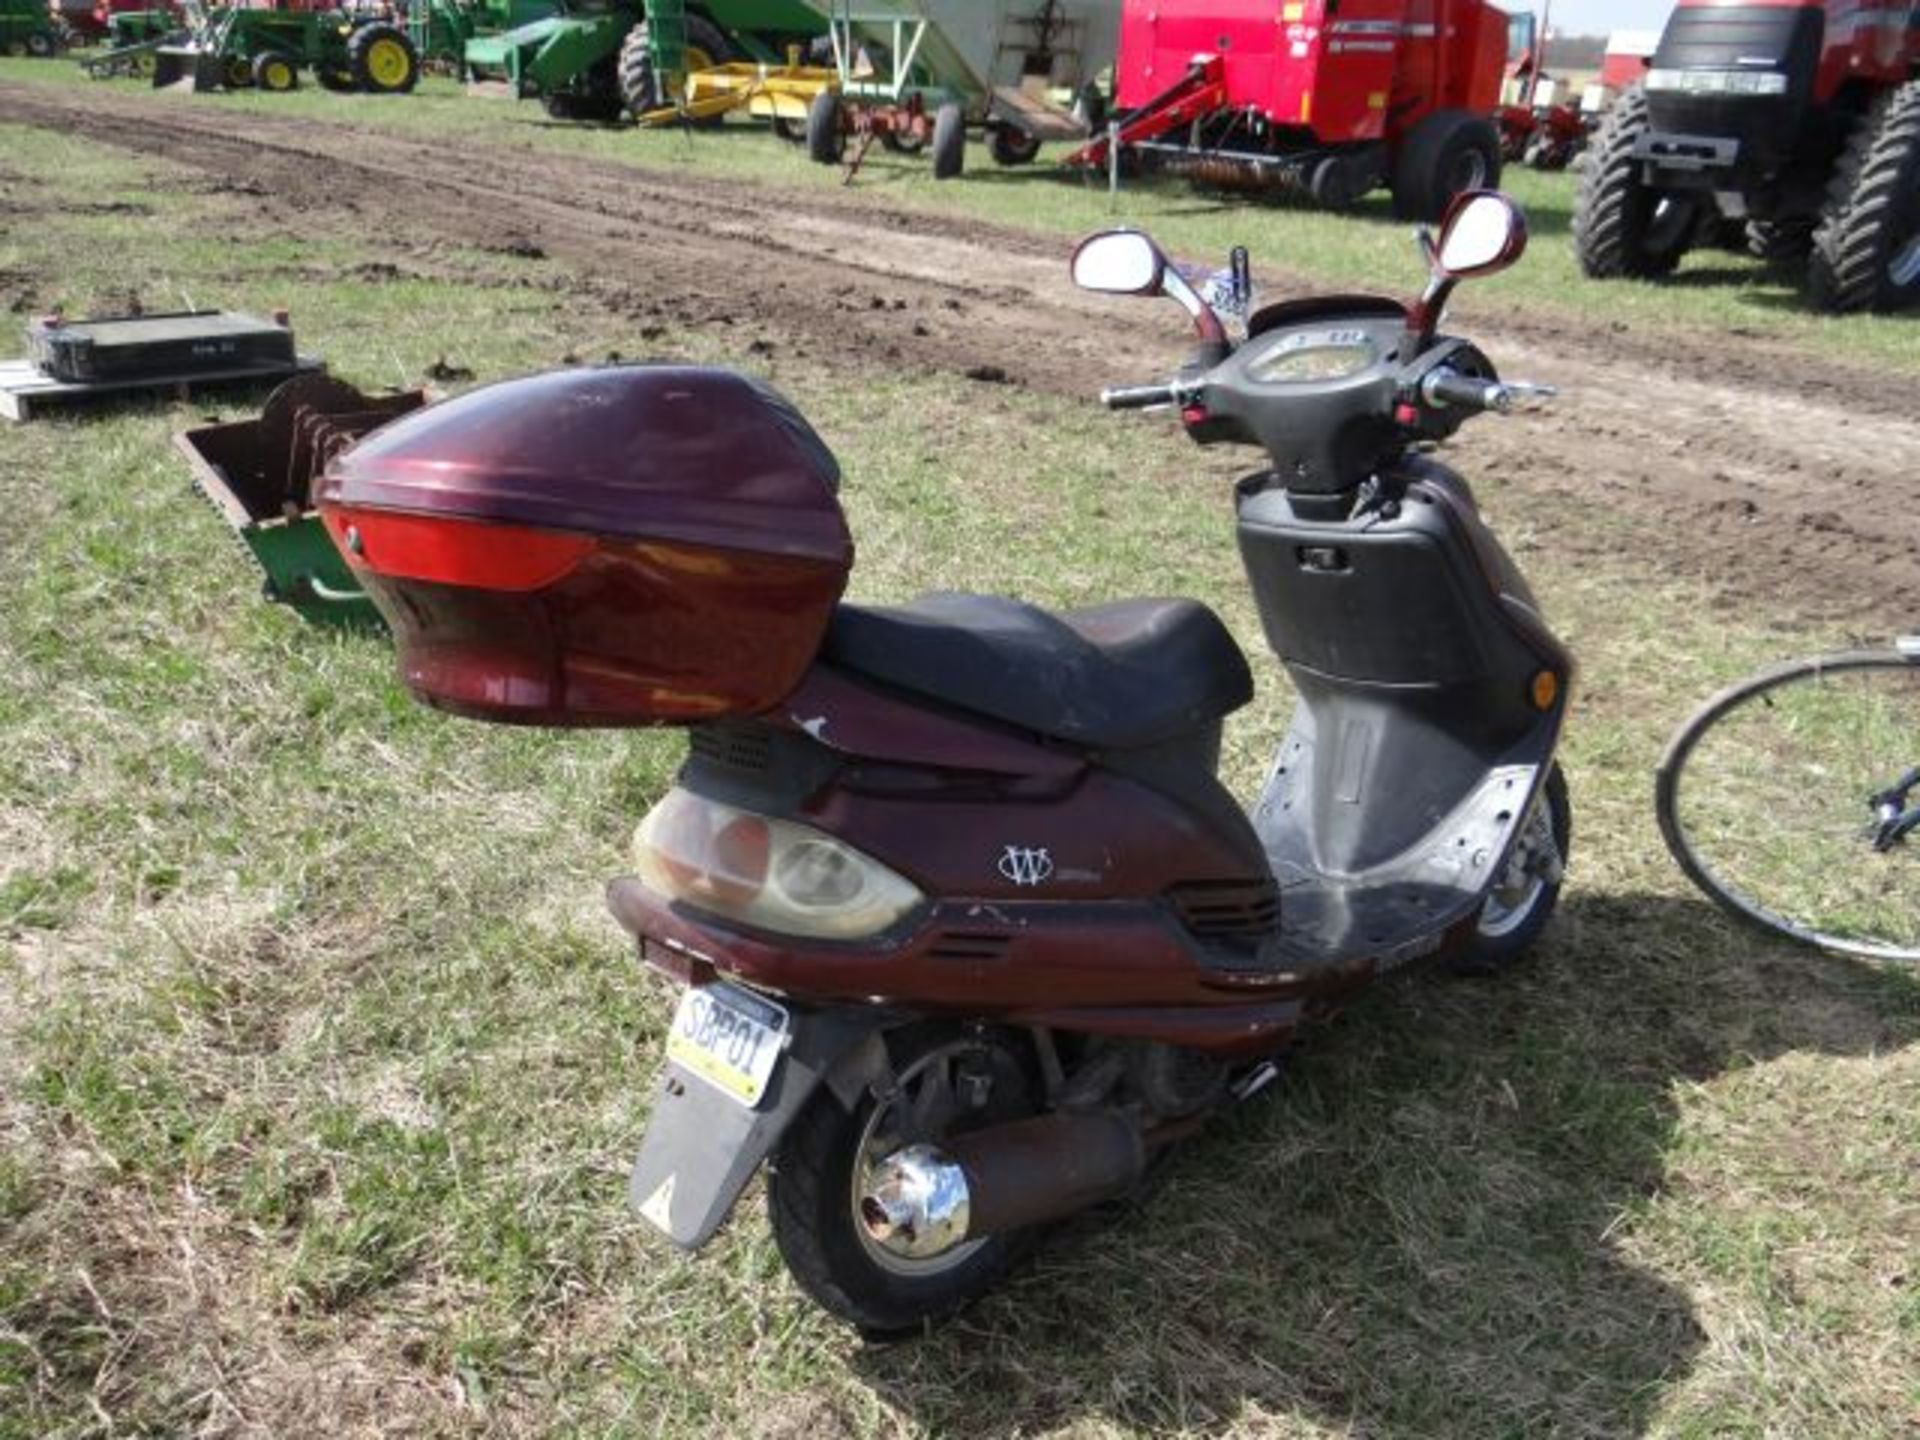 Lot 3008 Wildfire MoPed Not Running, No Title - Image 4 of 4